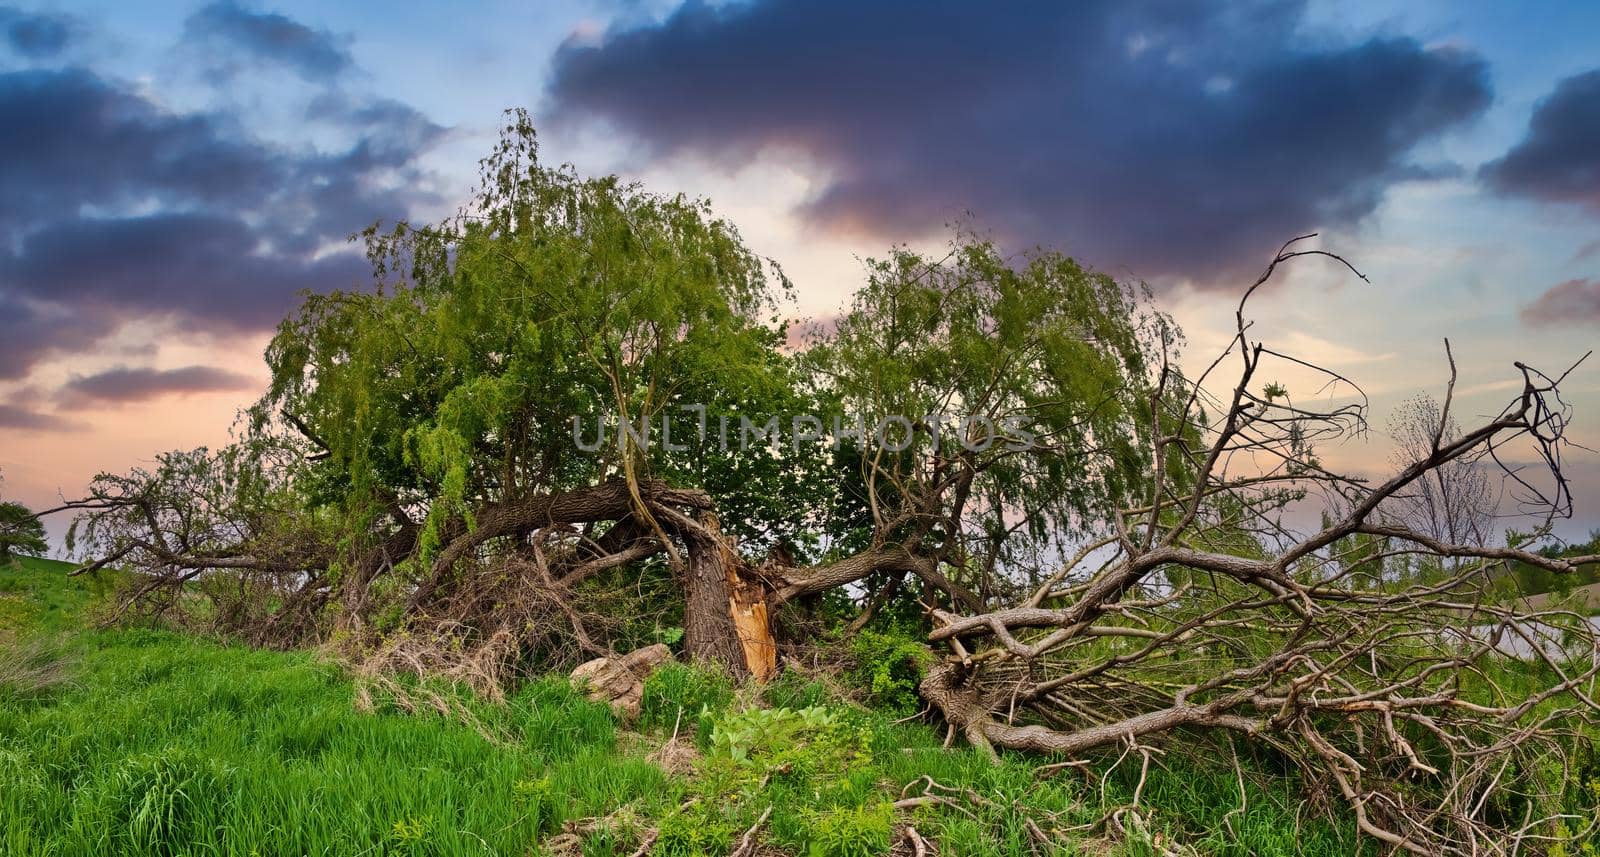 Panorama of Magnificent Giant Willow Tree Split and Broken in a Farmer's Field by markvandam